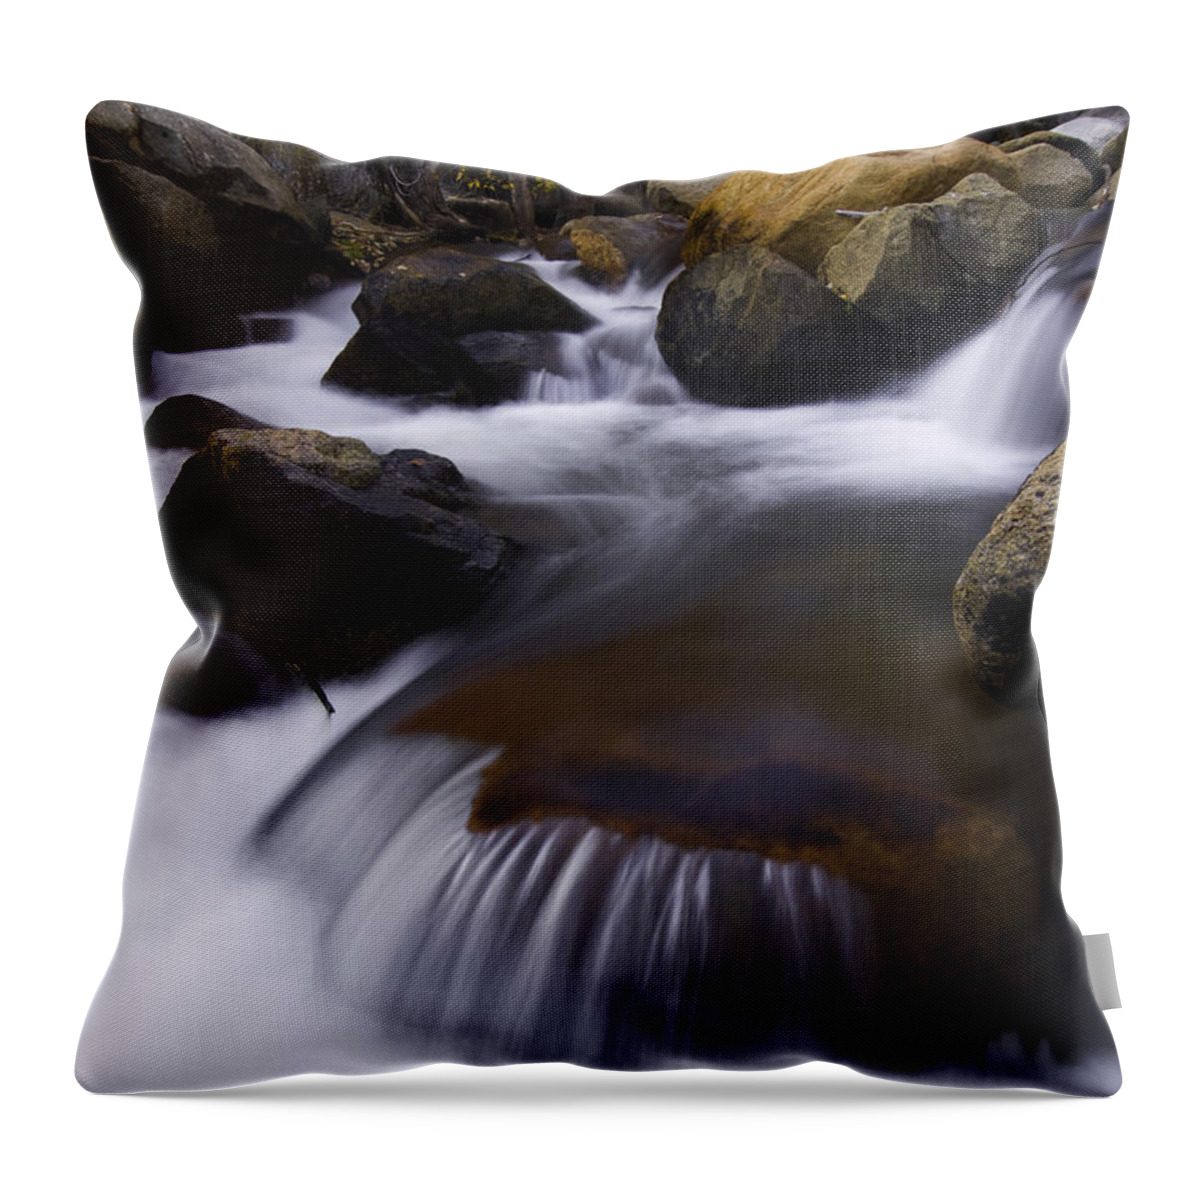 Stream Throw Pillow featuring the photograph Cascading Stream #4 by John Shaw